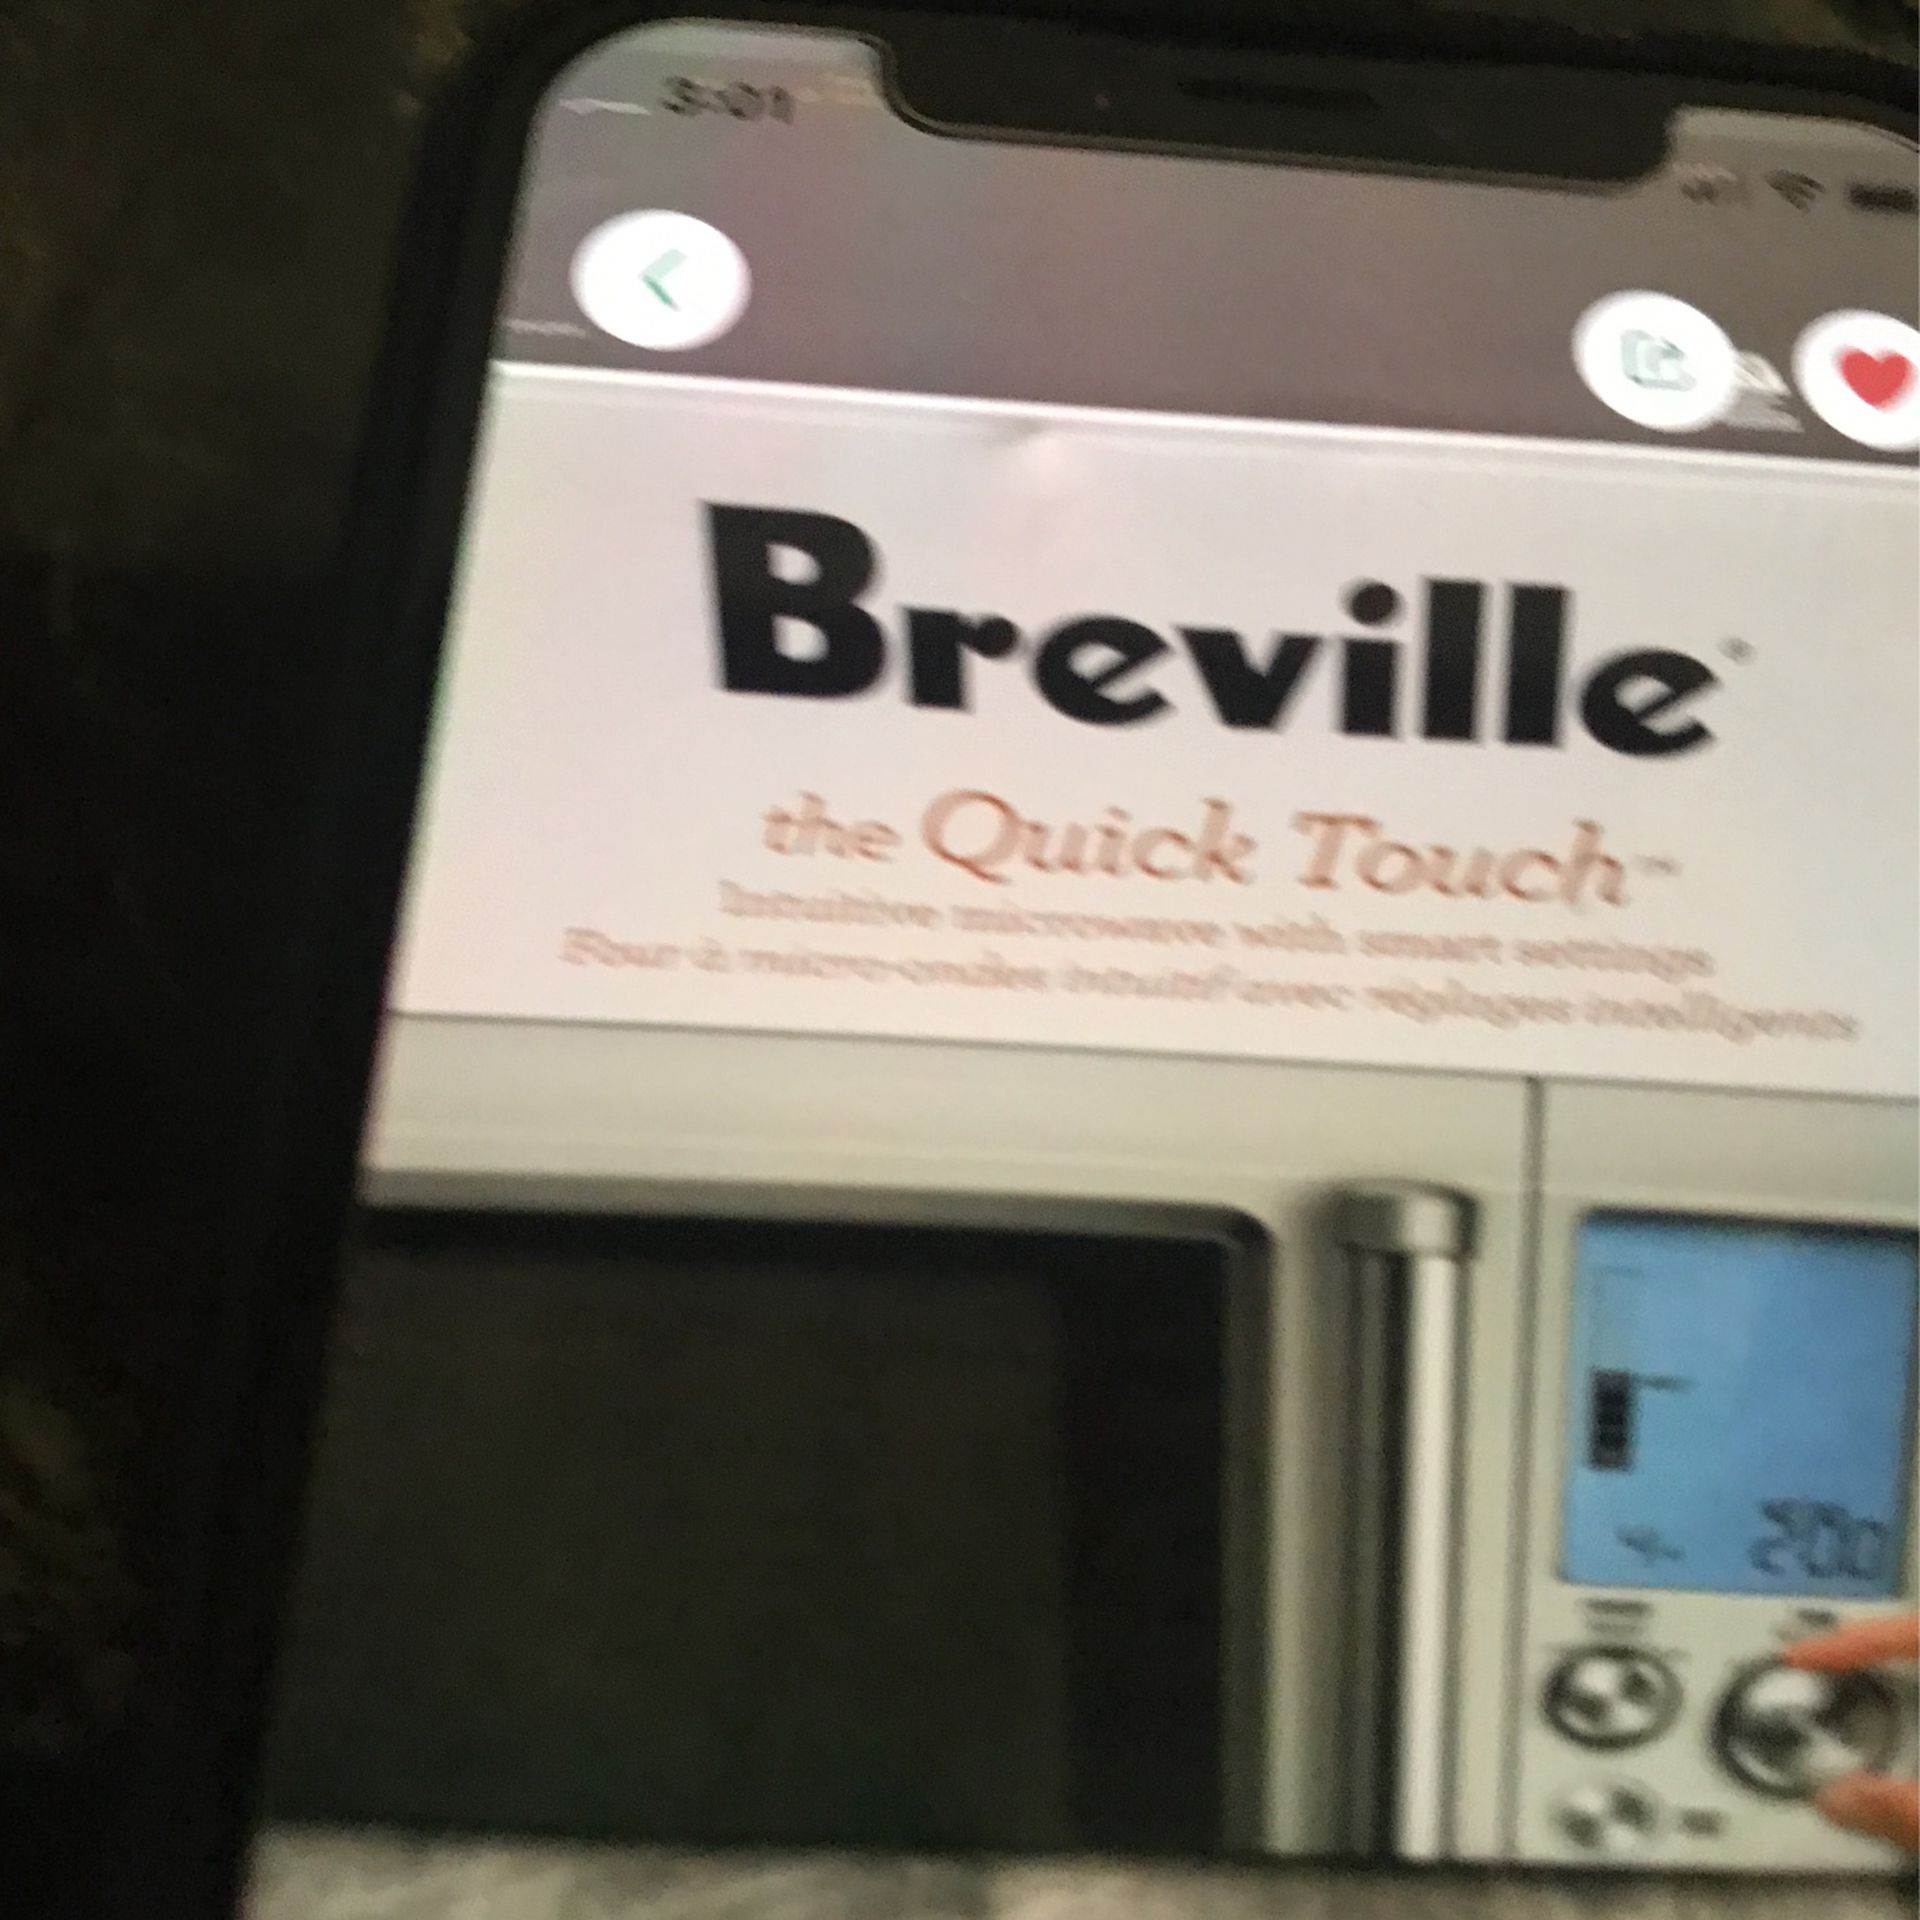 Mictowave  Breville Quick Touch New Nev Open $200 Or Best Offer